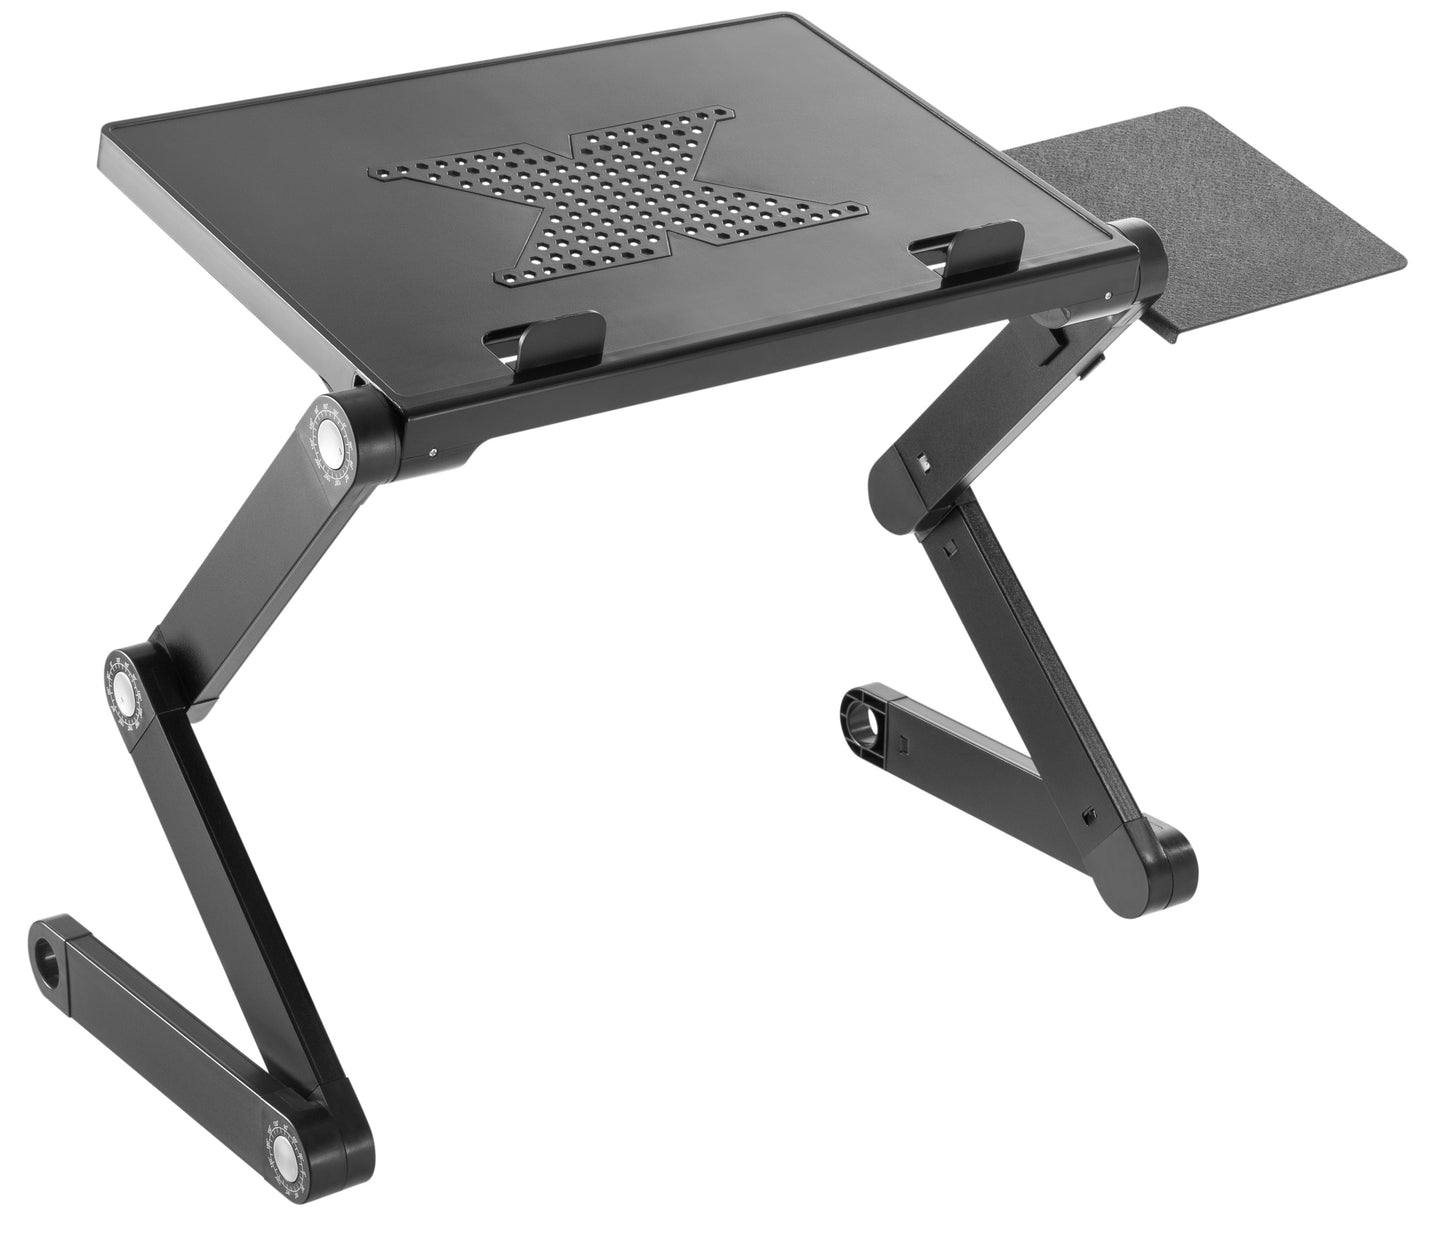 ProperAV Laptop, Tablet or Monitor Riser Stand with Extending Legs & Mouse Pad Side Mount - Black - maplin.co.uk